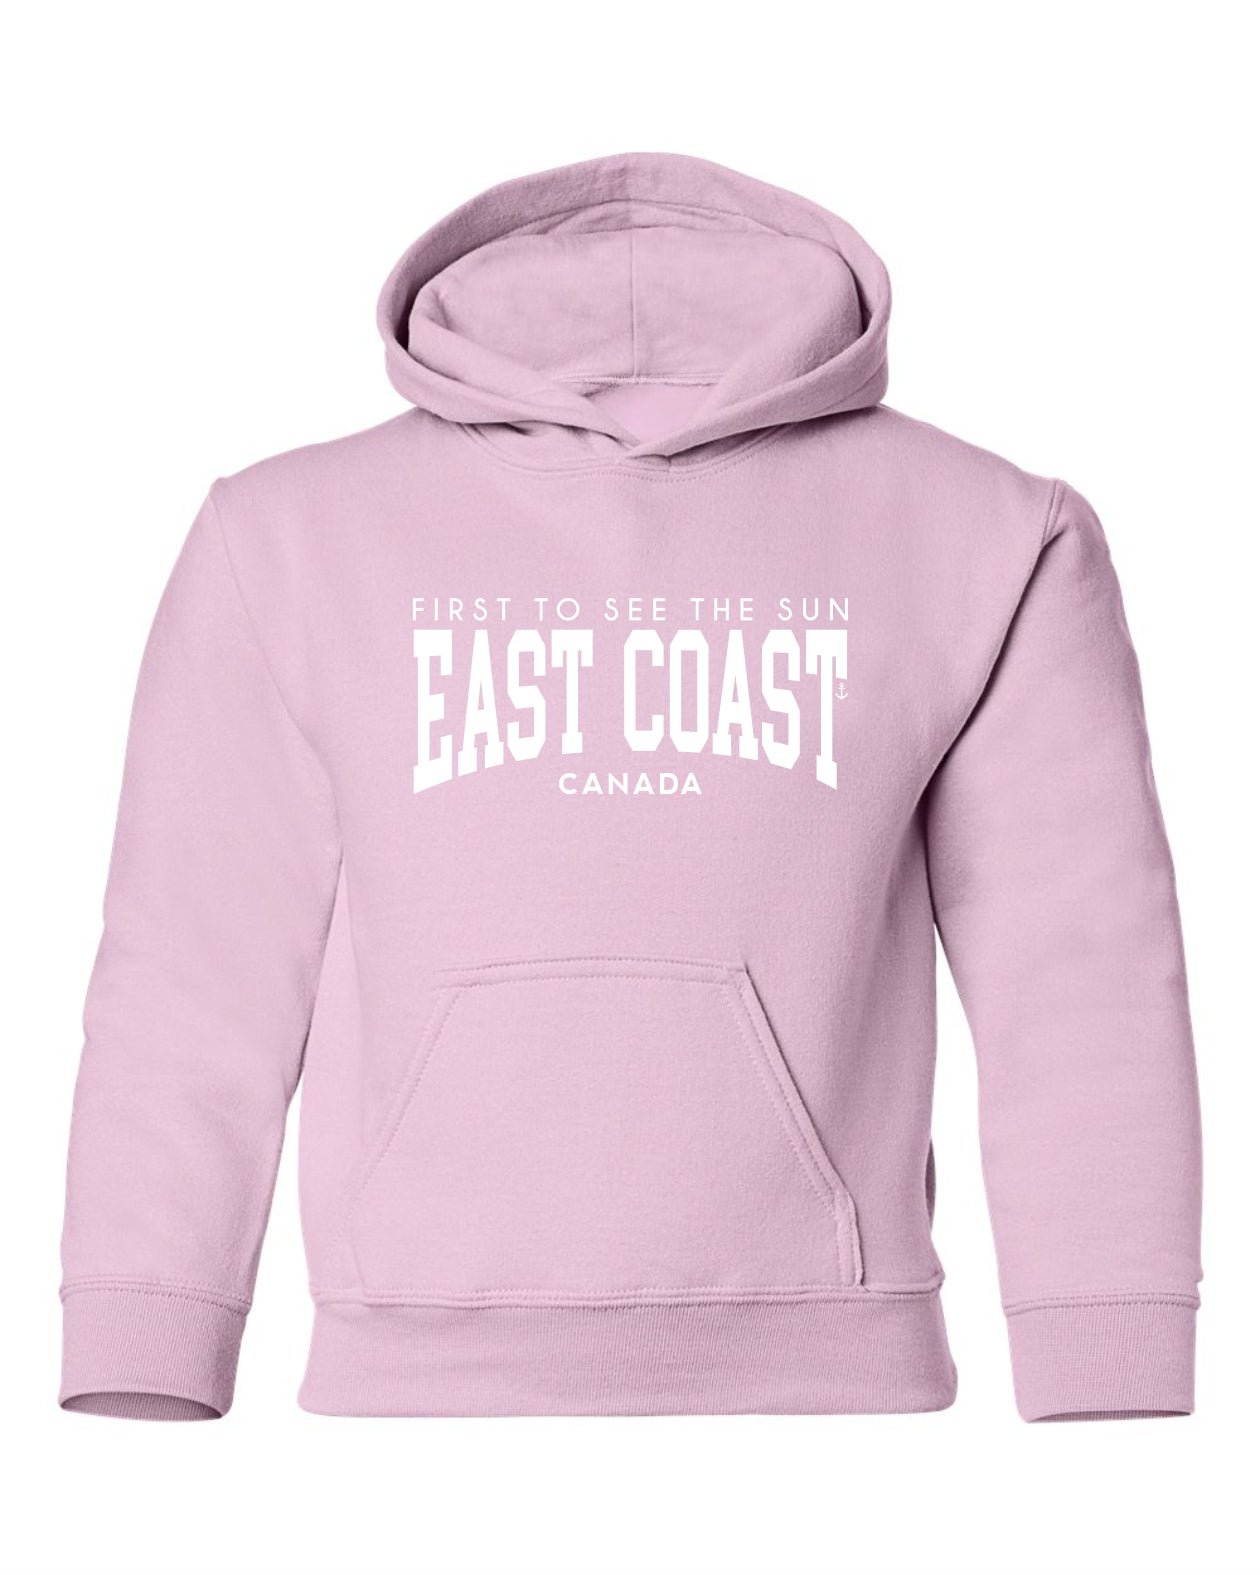 "East Coast - First To See The Sun" Youth Hoodie